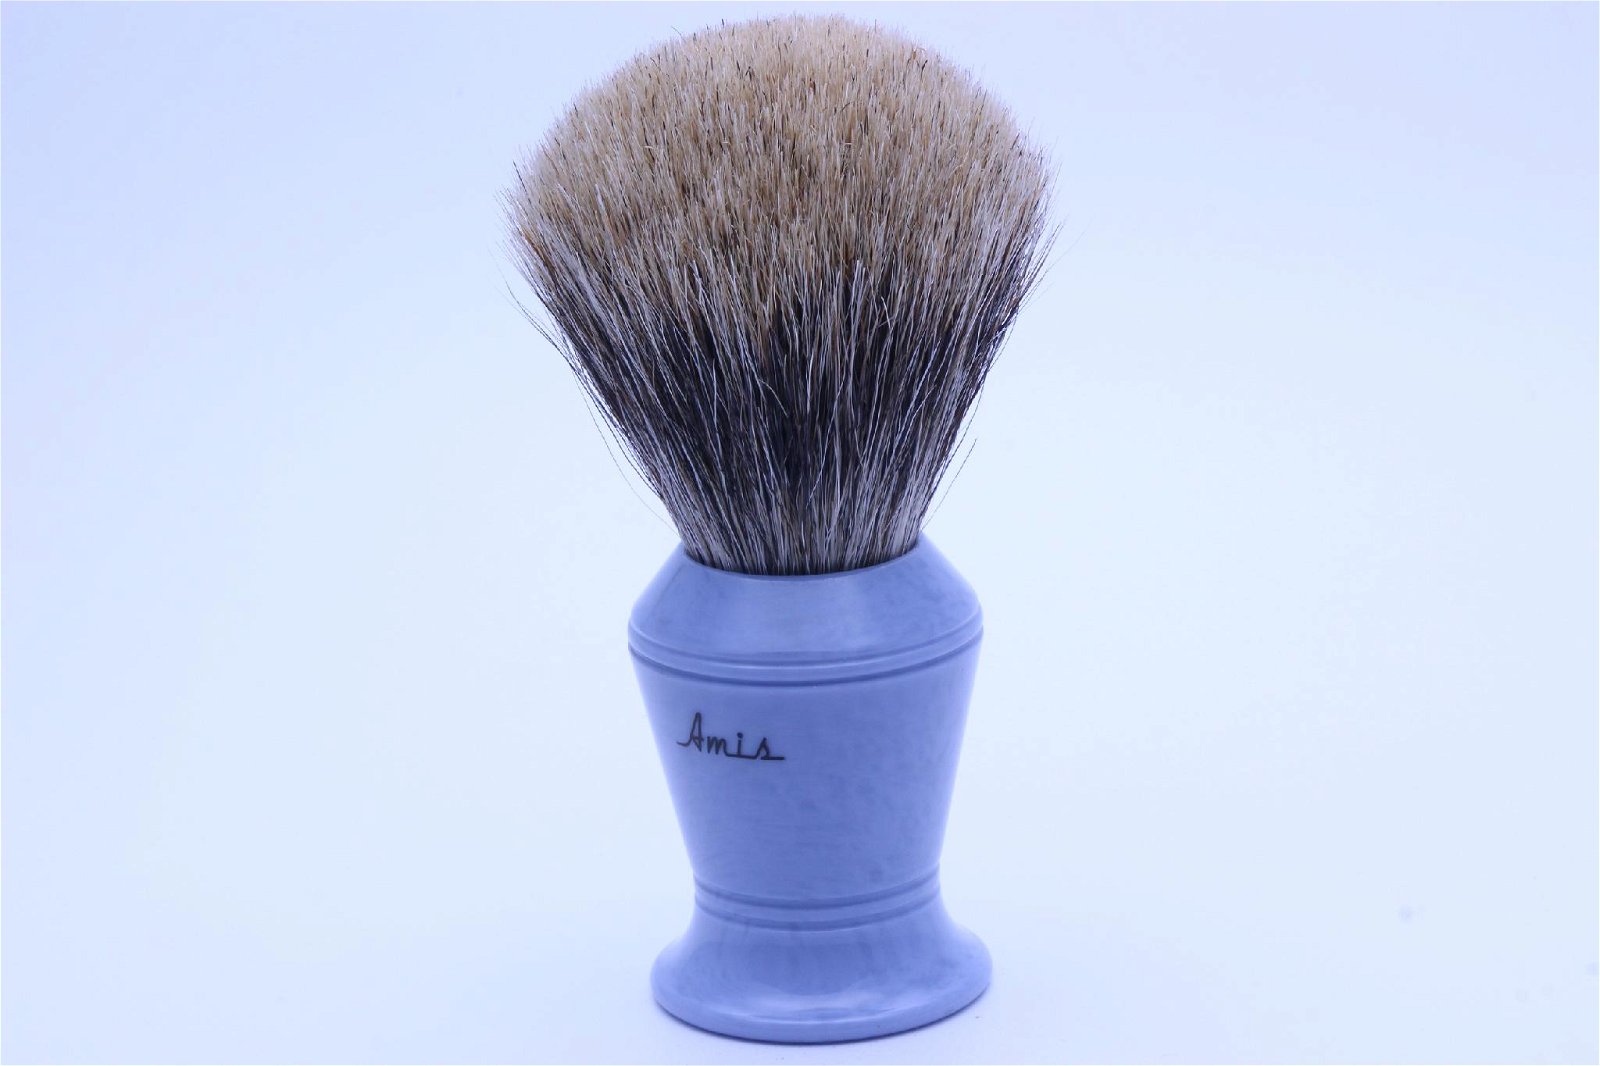 Amis  Hand Crafted 100% Pure Badger Shaving Brush  4